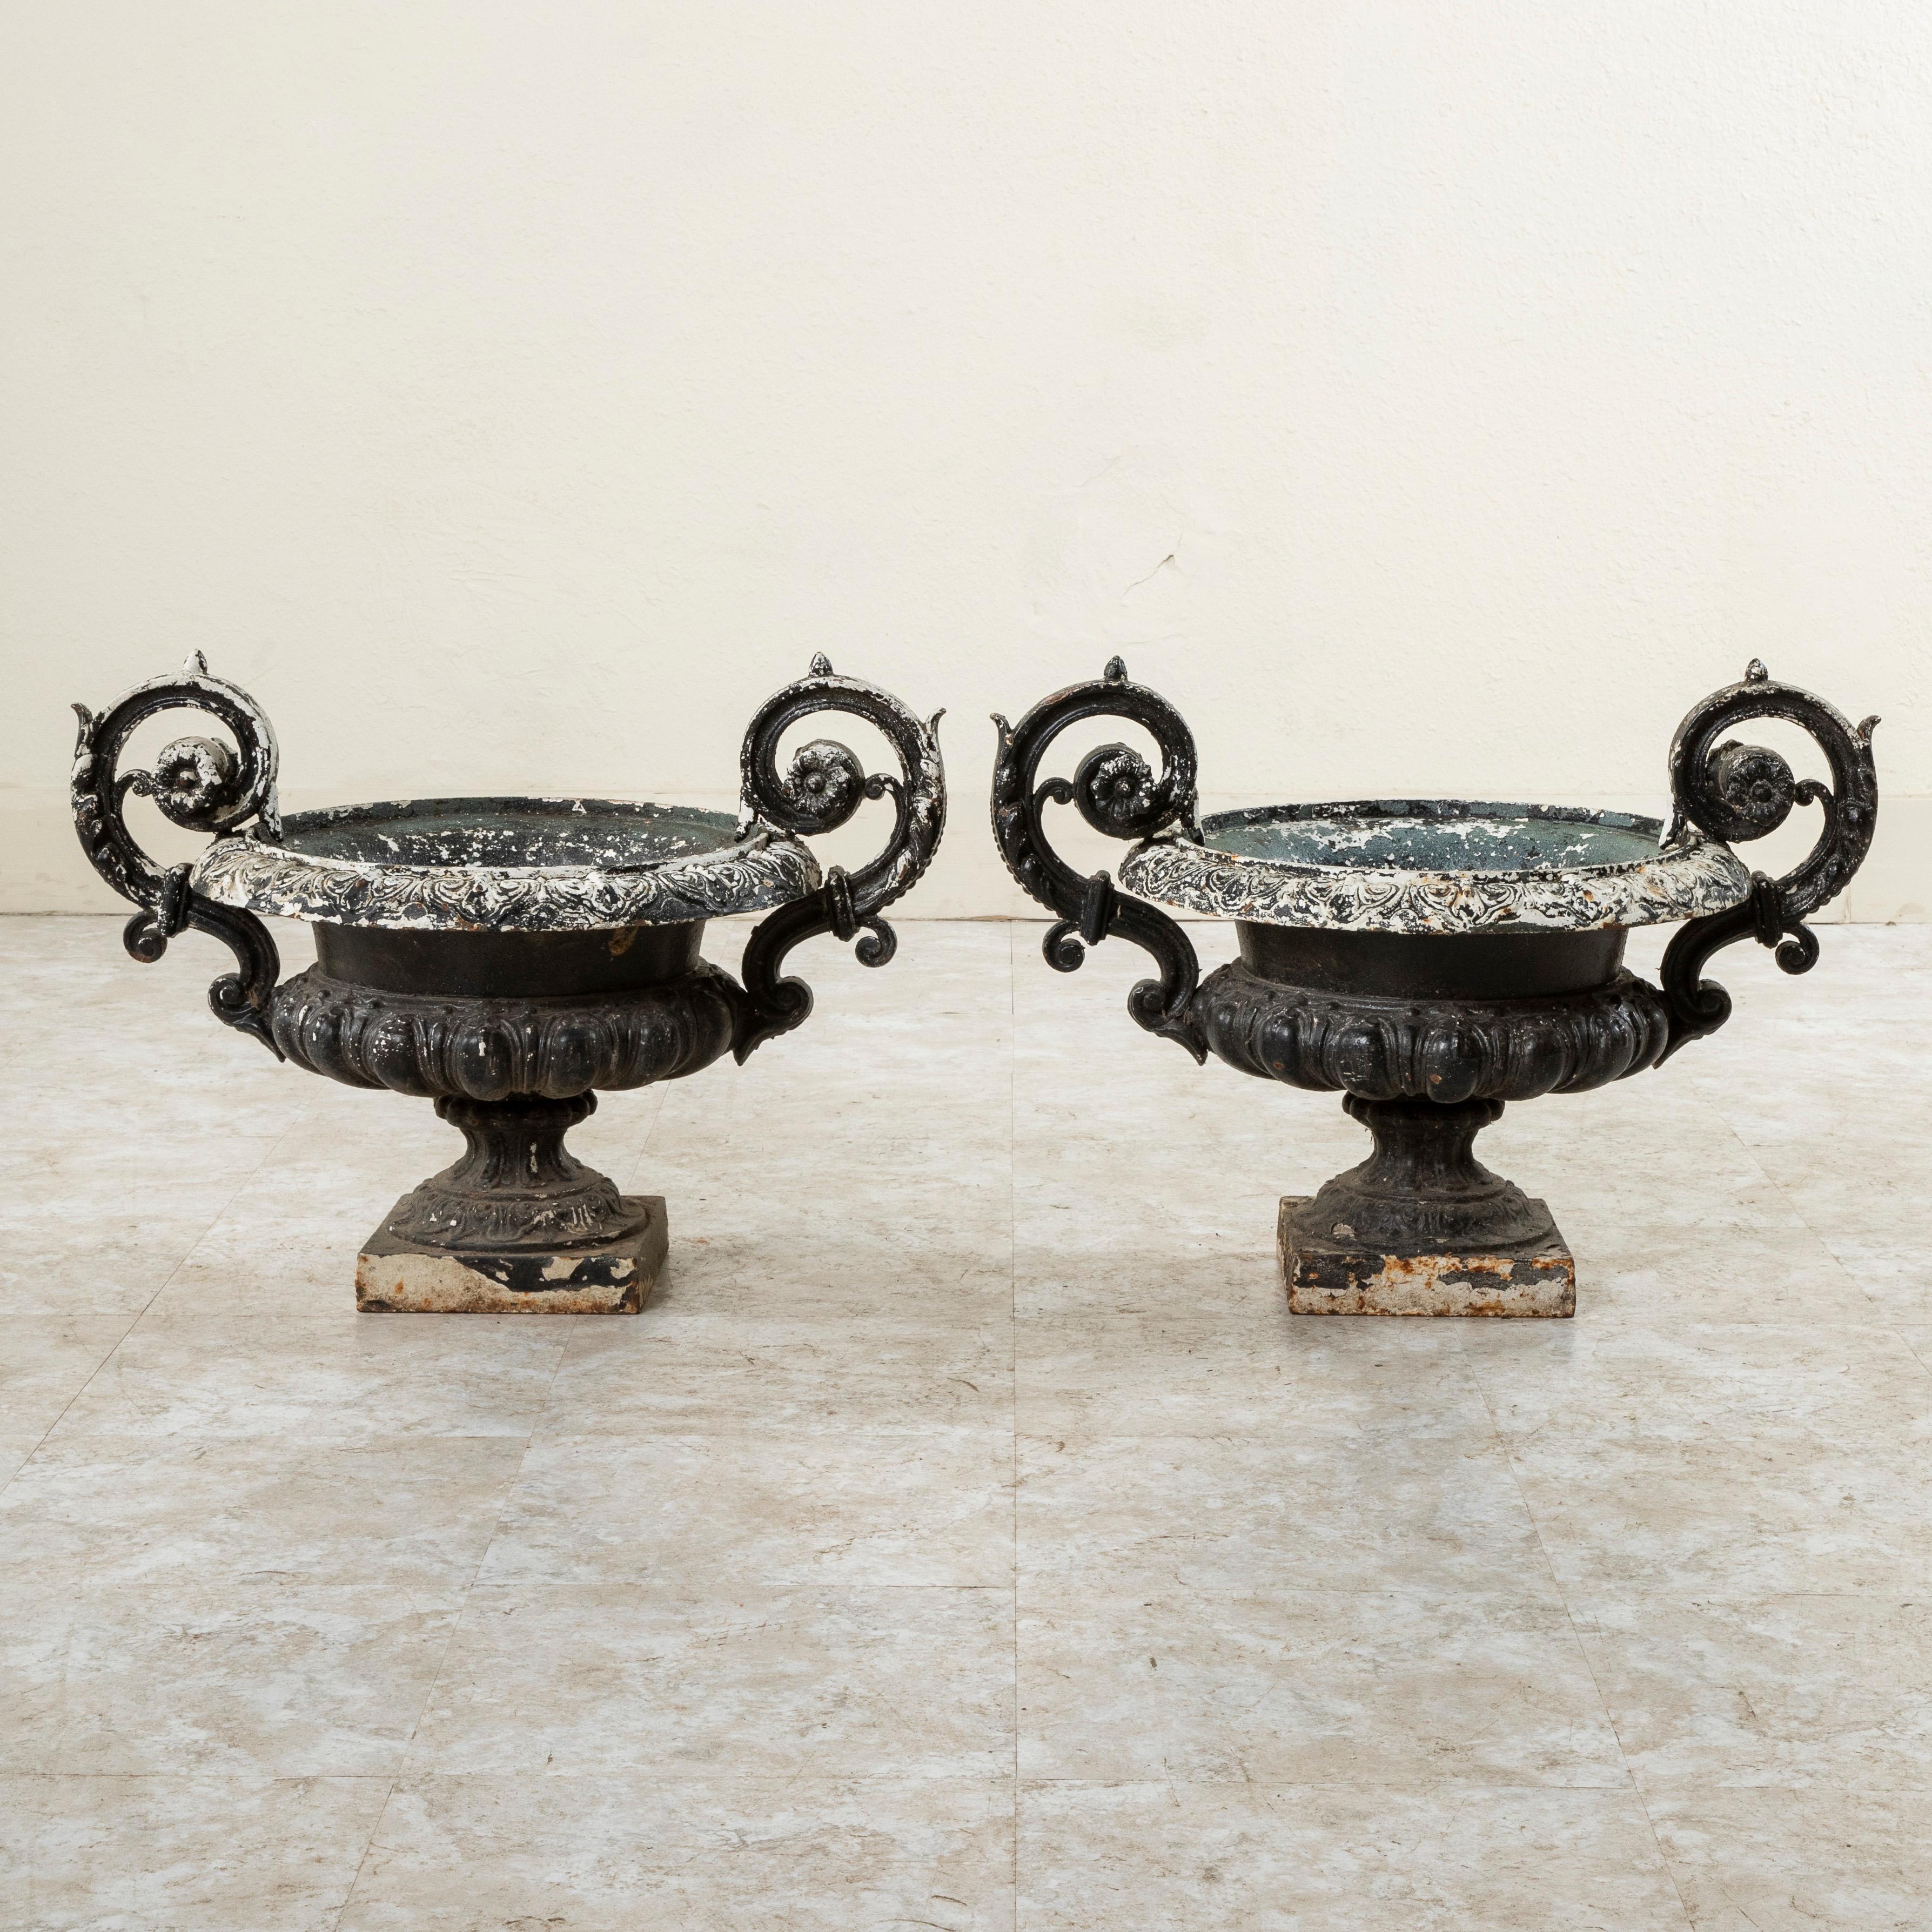 Measuring 25 inches wide with their handles, this weathered pair of large French cast iron garden urns, or planters from the late nineteenth century features a scalloped egg and dart pattern and scrolled shells around the rim. Scrolled handles at